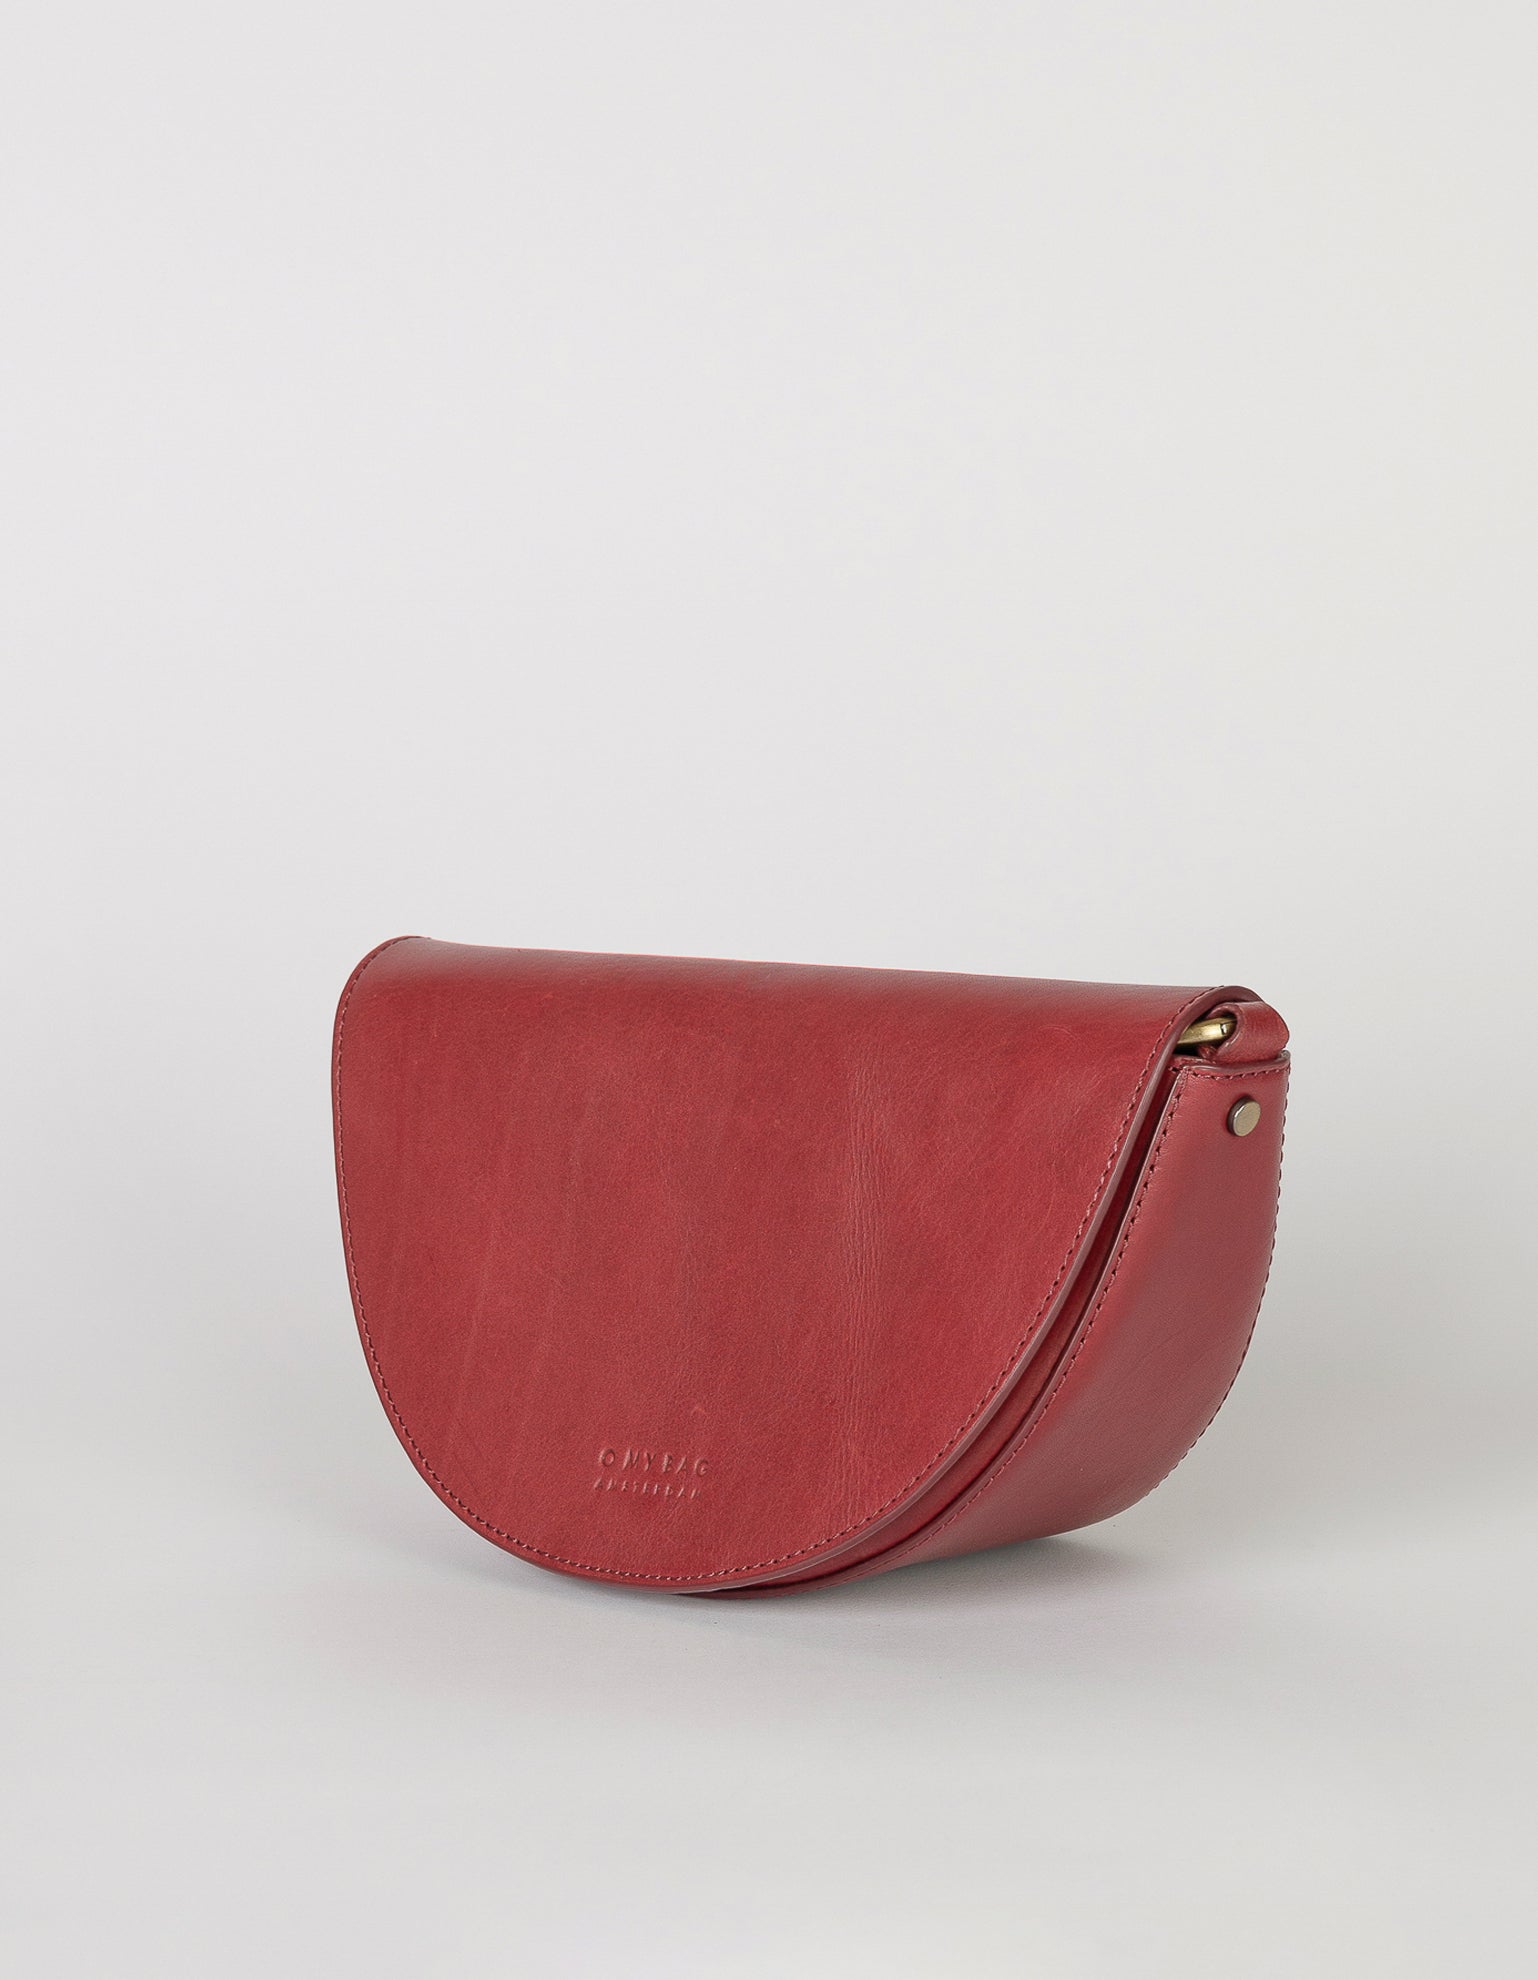 Laura Bag in Ruby Classic Leather ft. Checkered Webbing Strap - Side product image